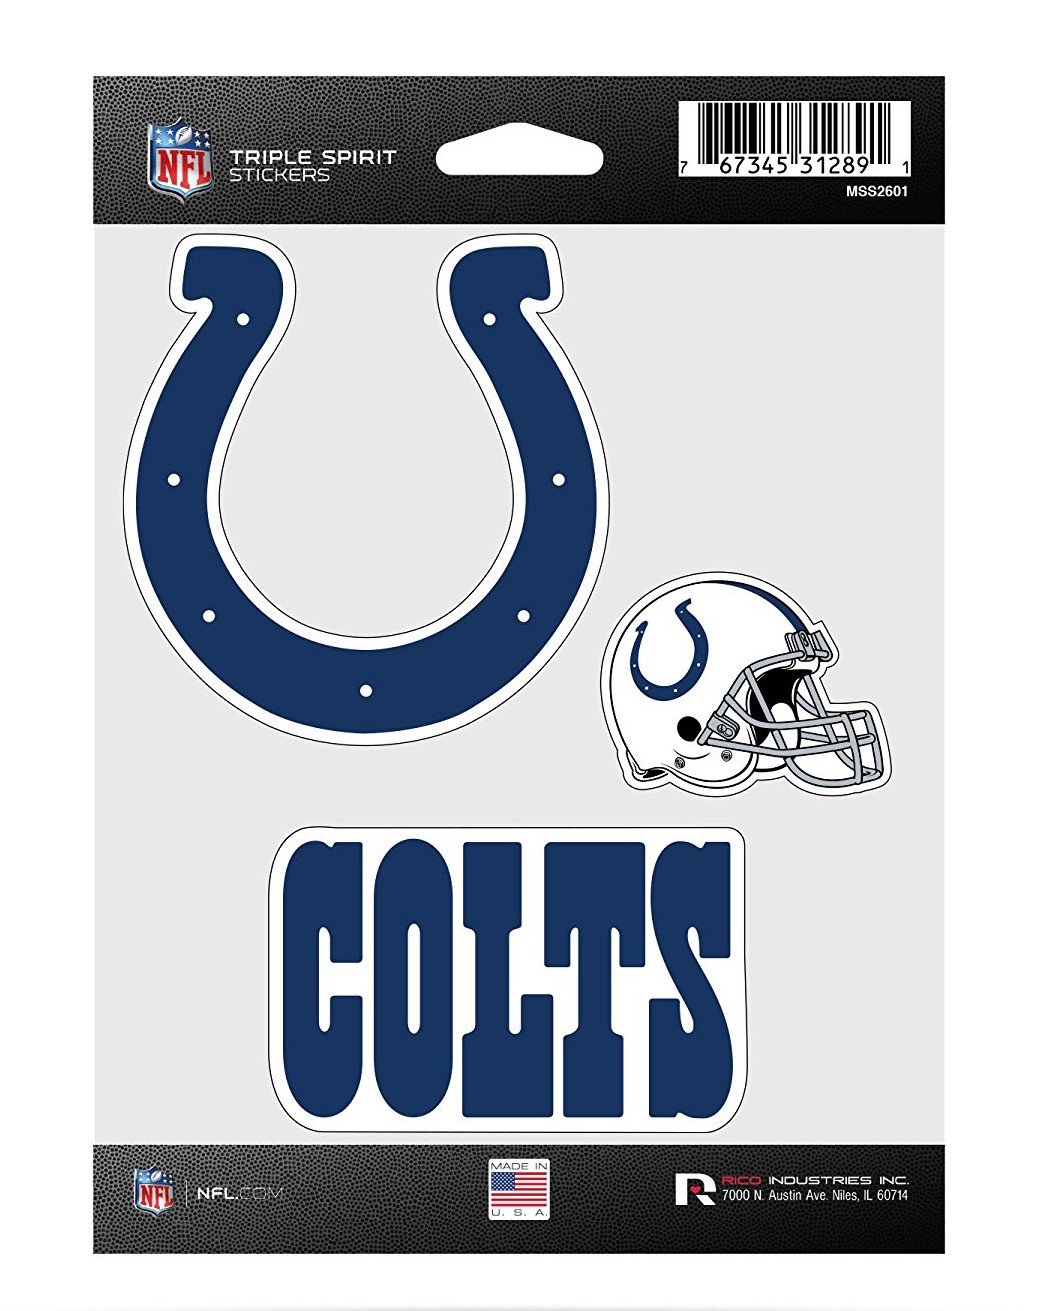 Indianapolis Colts Multi Sticker Triple Decal Flat Vinyl 5x7 Inch Sheet Auto Home